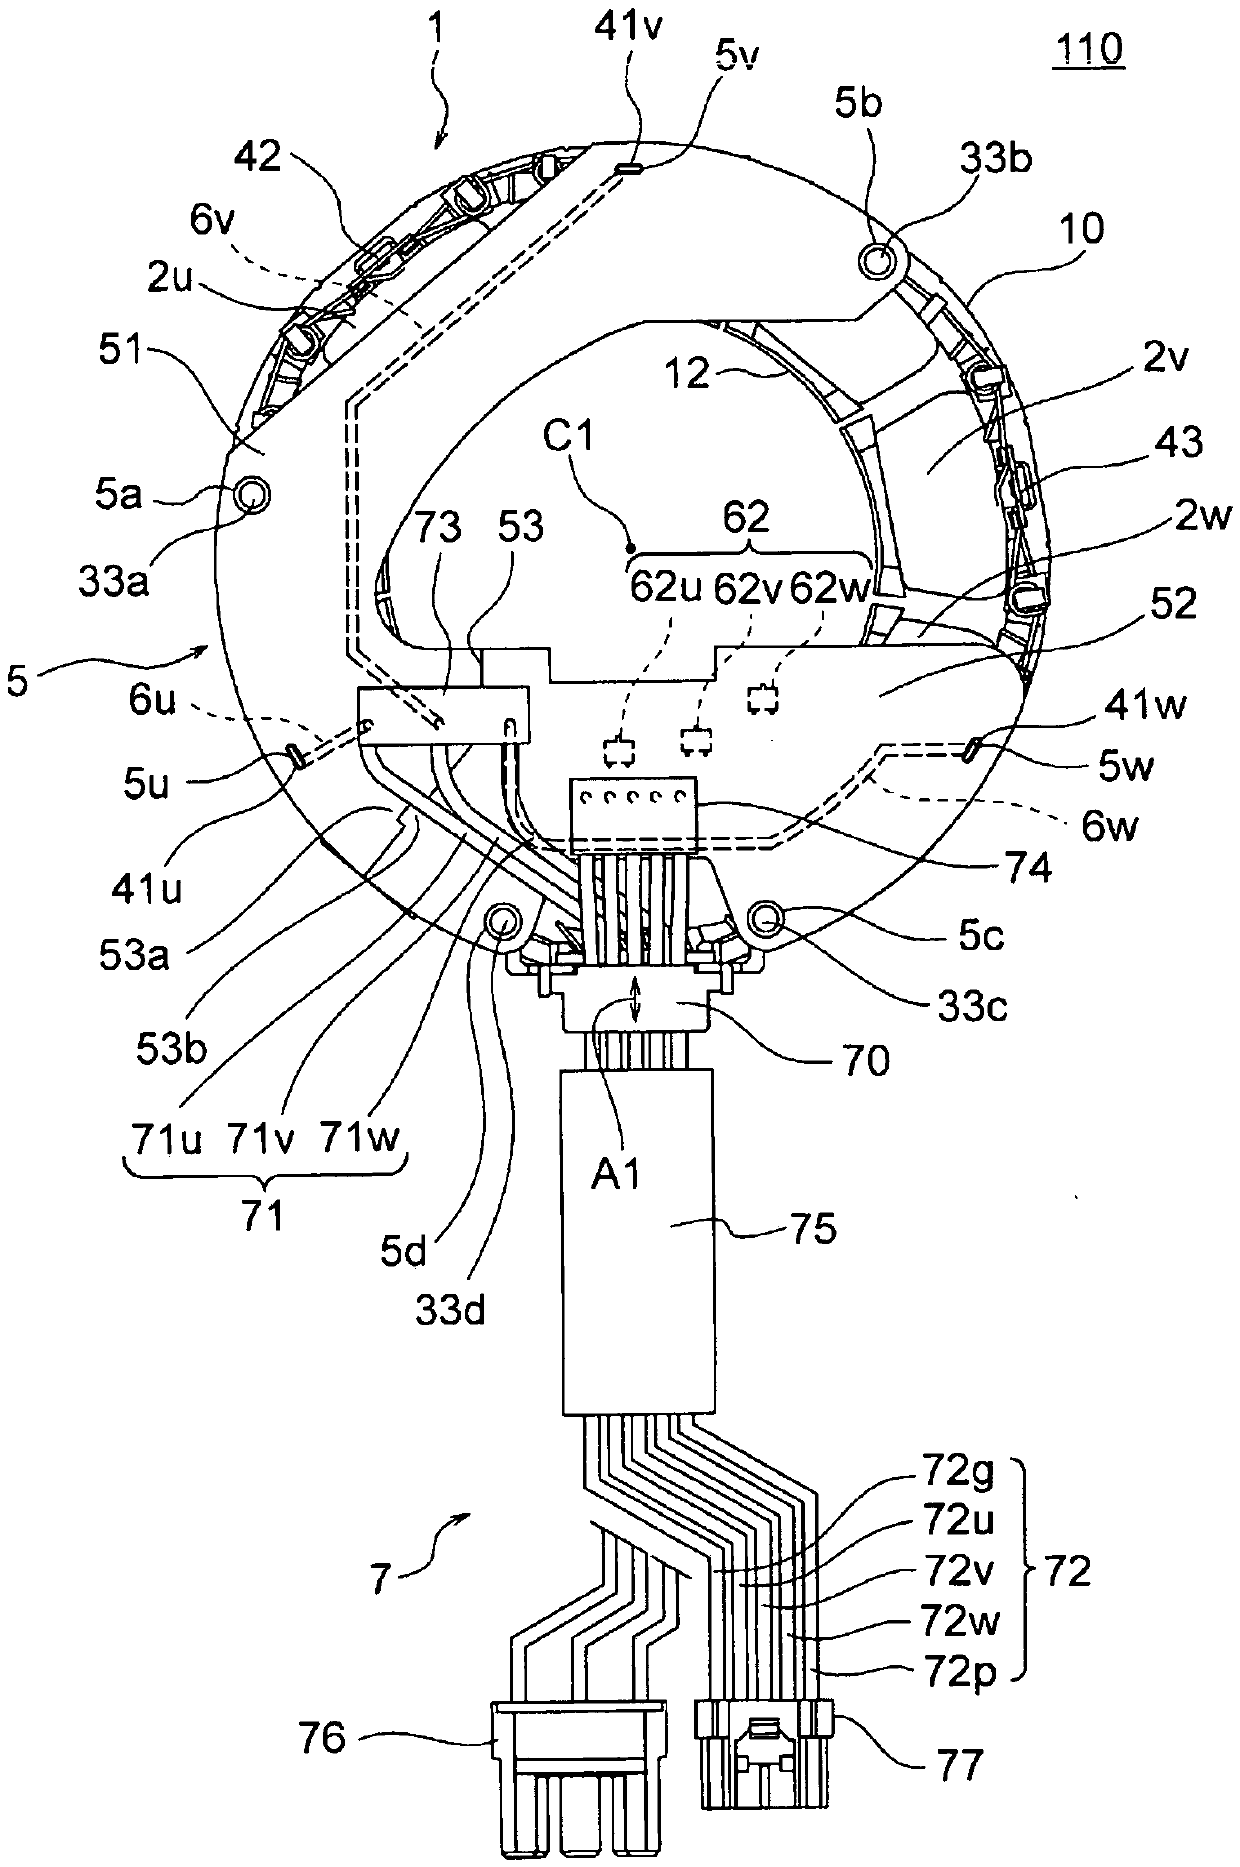 Motor and air-conditioning device